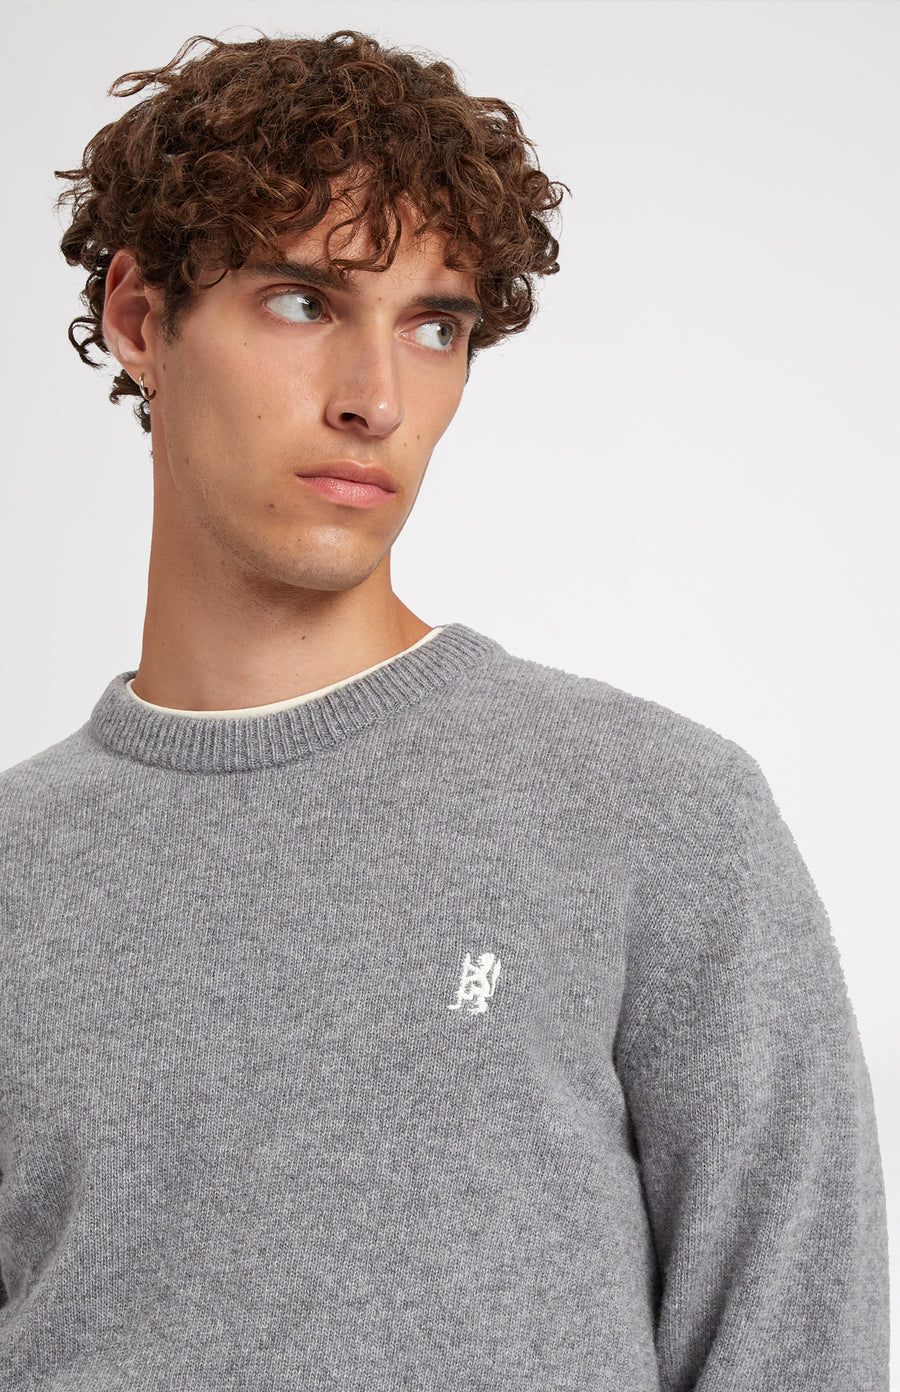 Round Neck Lambswool Blend Golf Jumper In Grey Marl showing embroidery detail - Pringle of Scotland